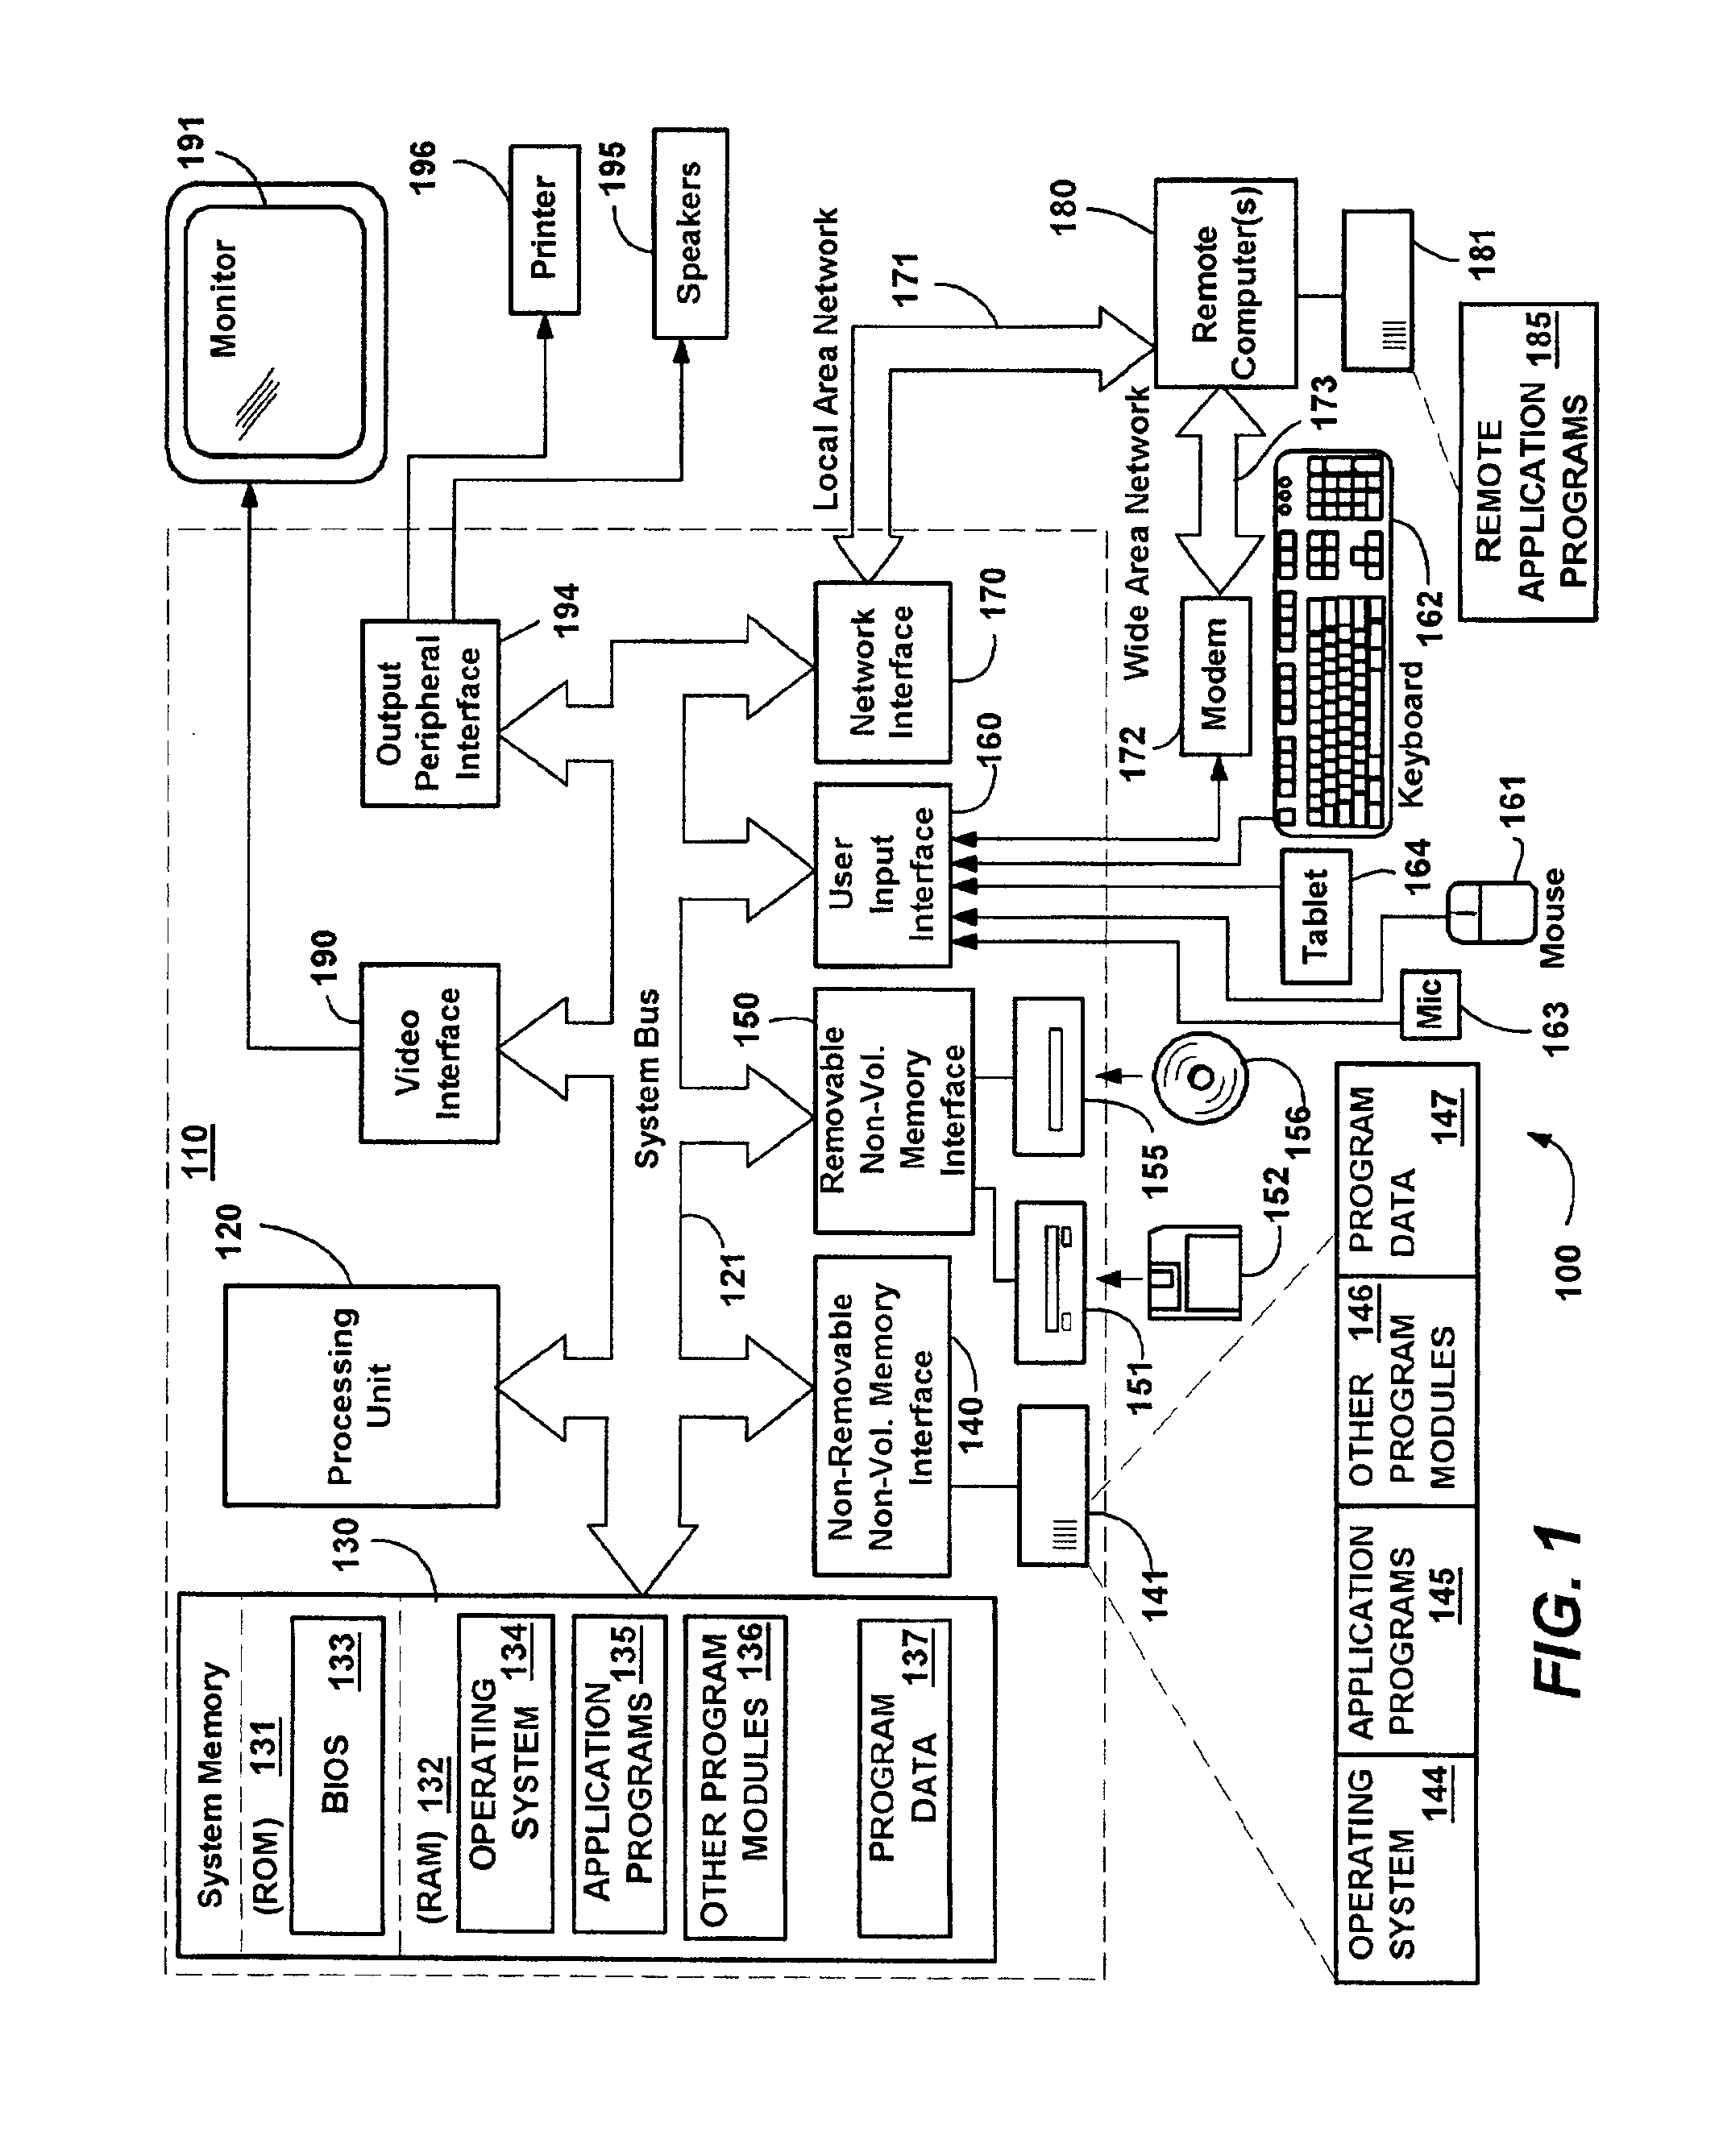 Method and system for protecting internet users' privacy by evaluating web site platform for privacy preferences policy